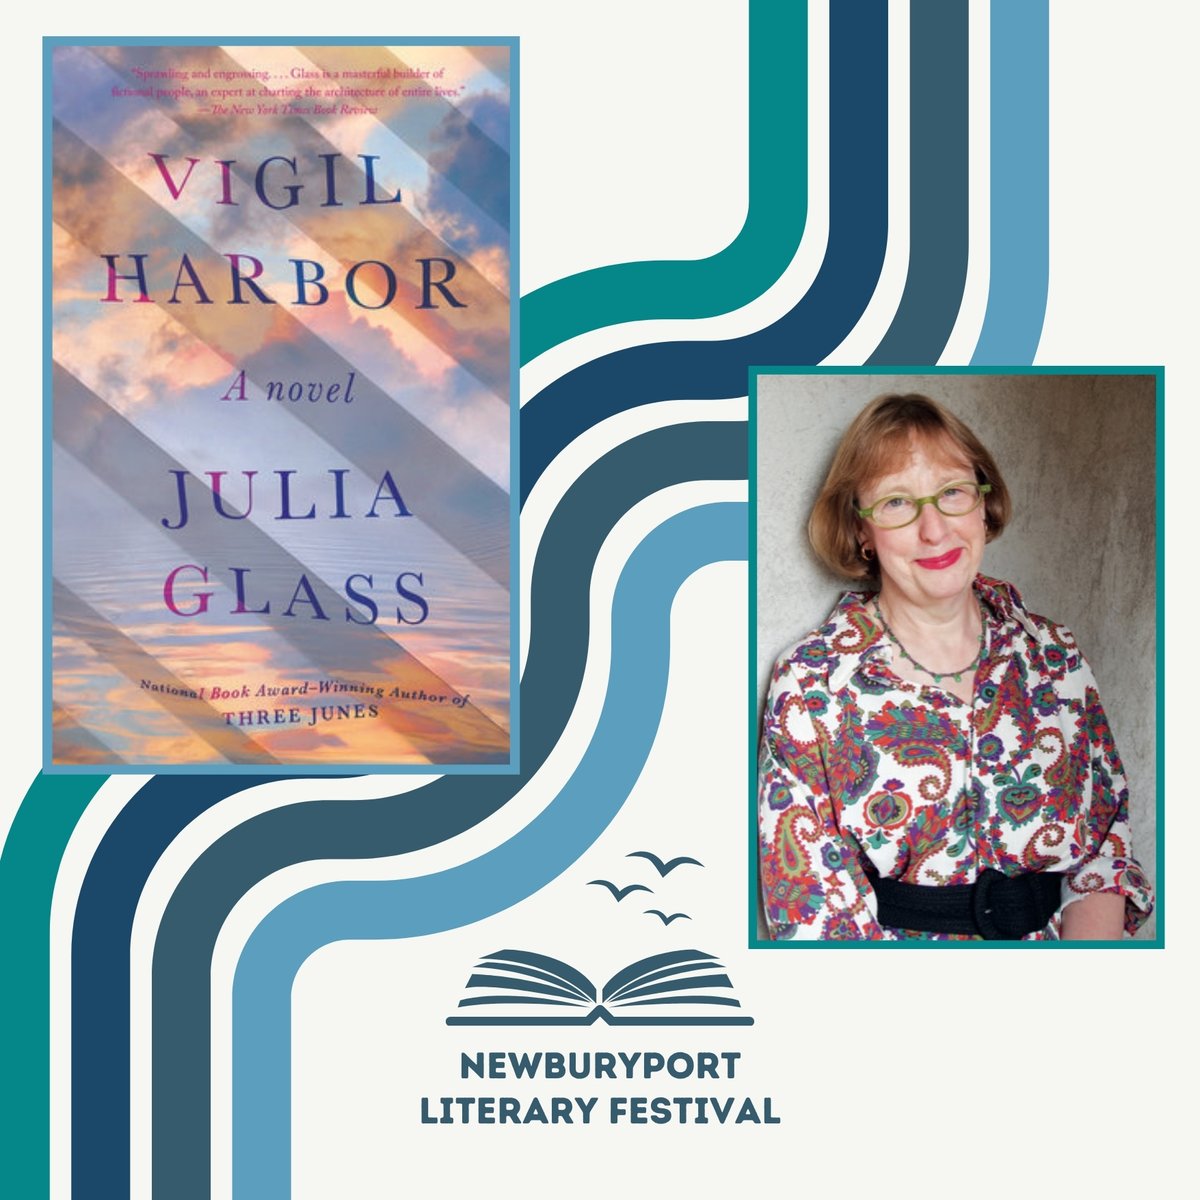 Join author #JuliaGlass in conversation with editor, writer, reviewer and former president of the National Book Critics Circle, #KateTuttle, at the #Newburyport Literary Festival. Saturday, April 27 - 9:00AM at the Old South Church!